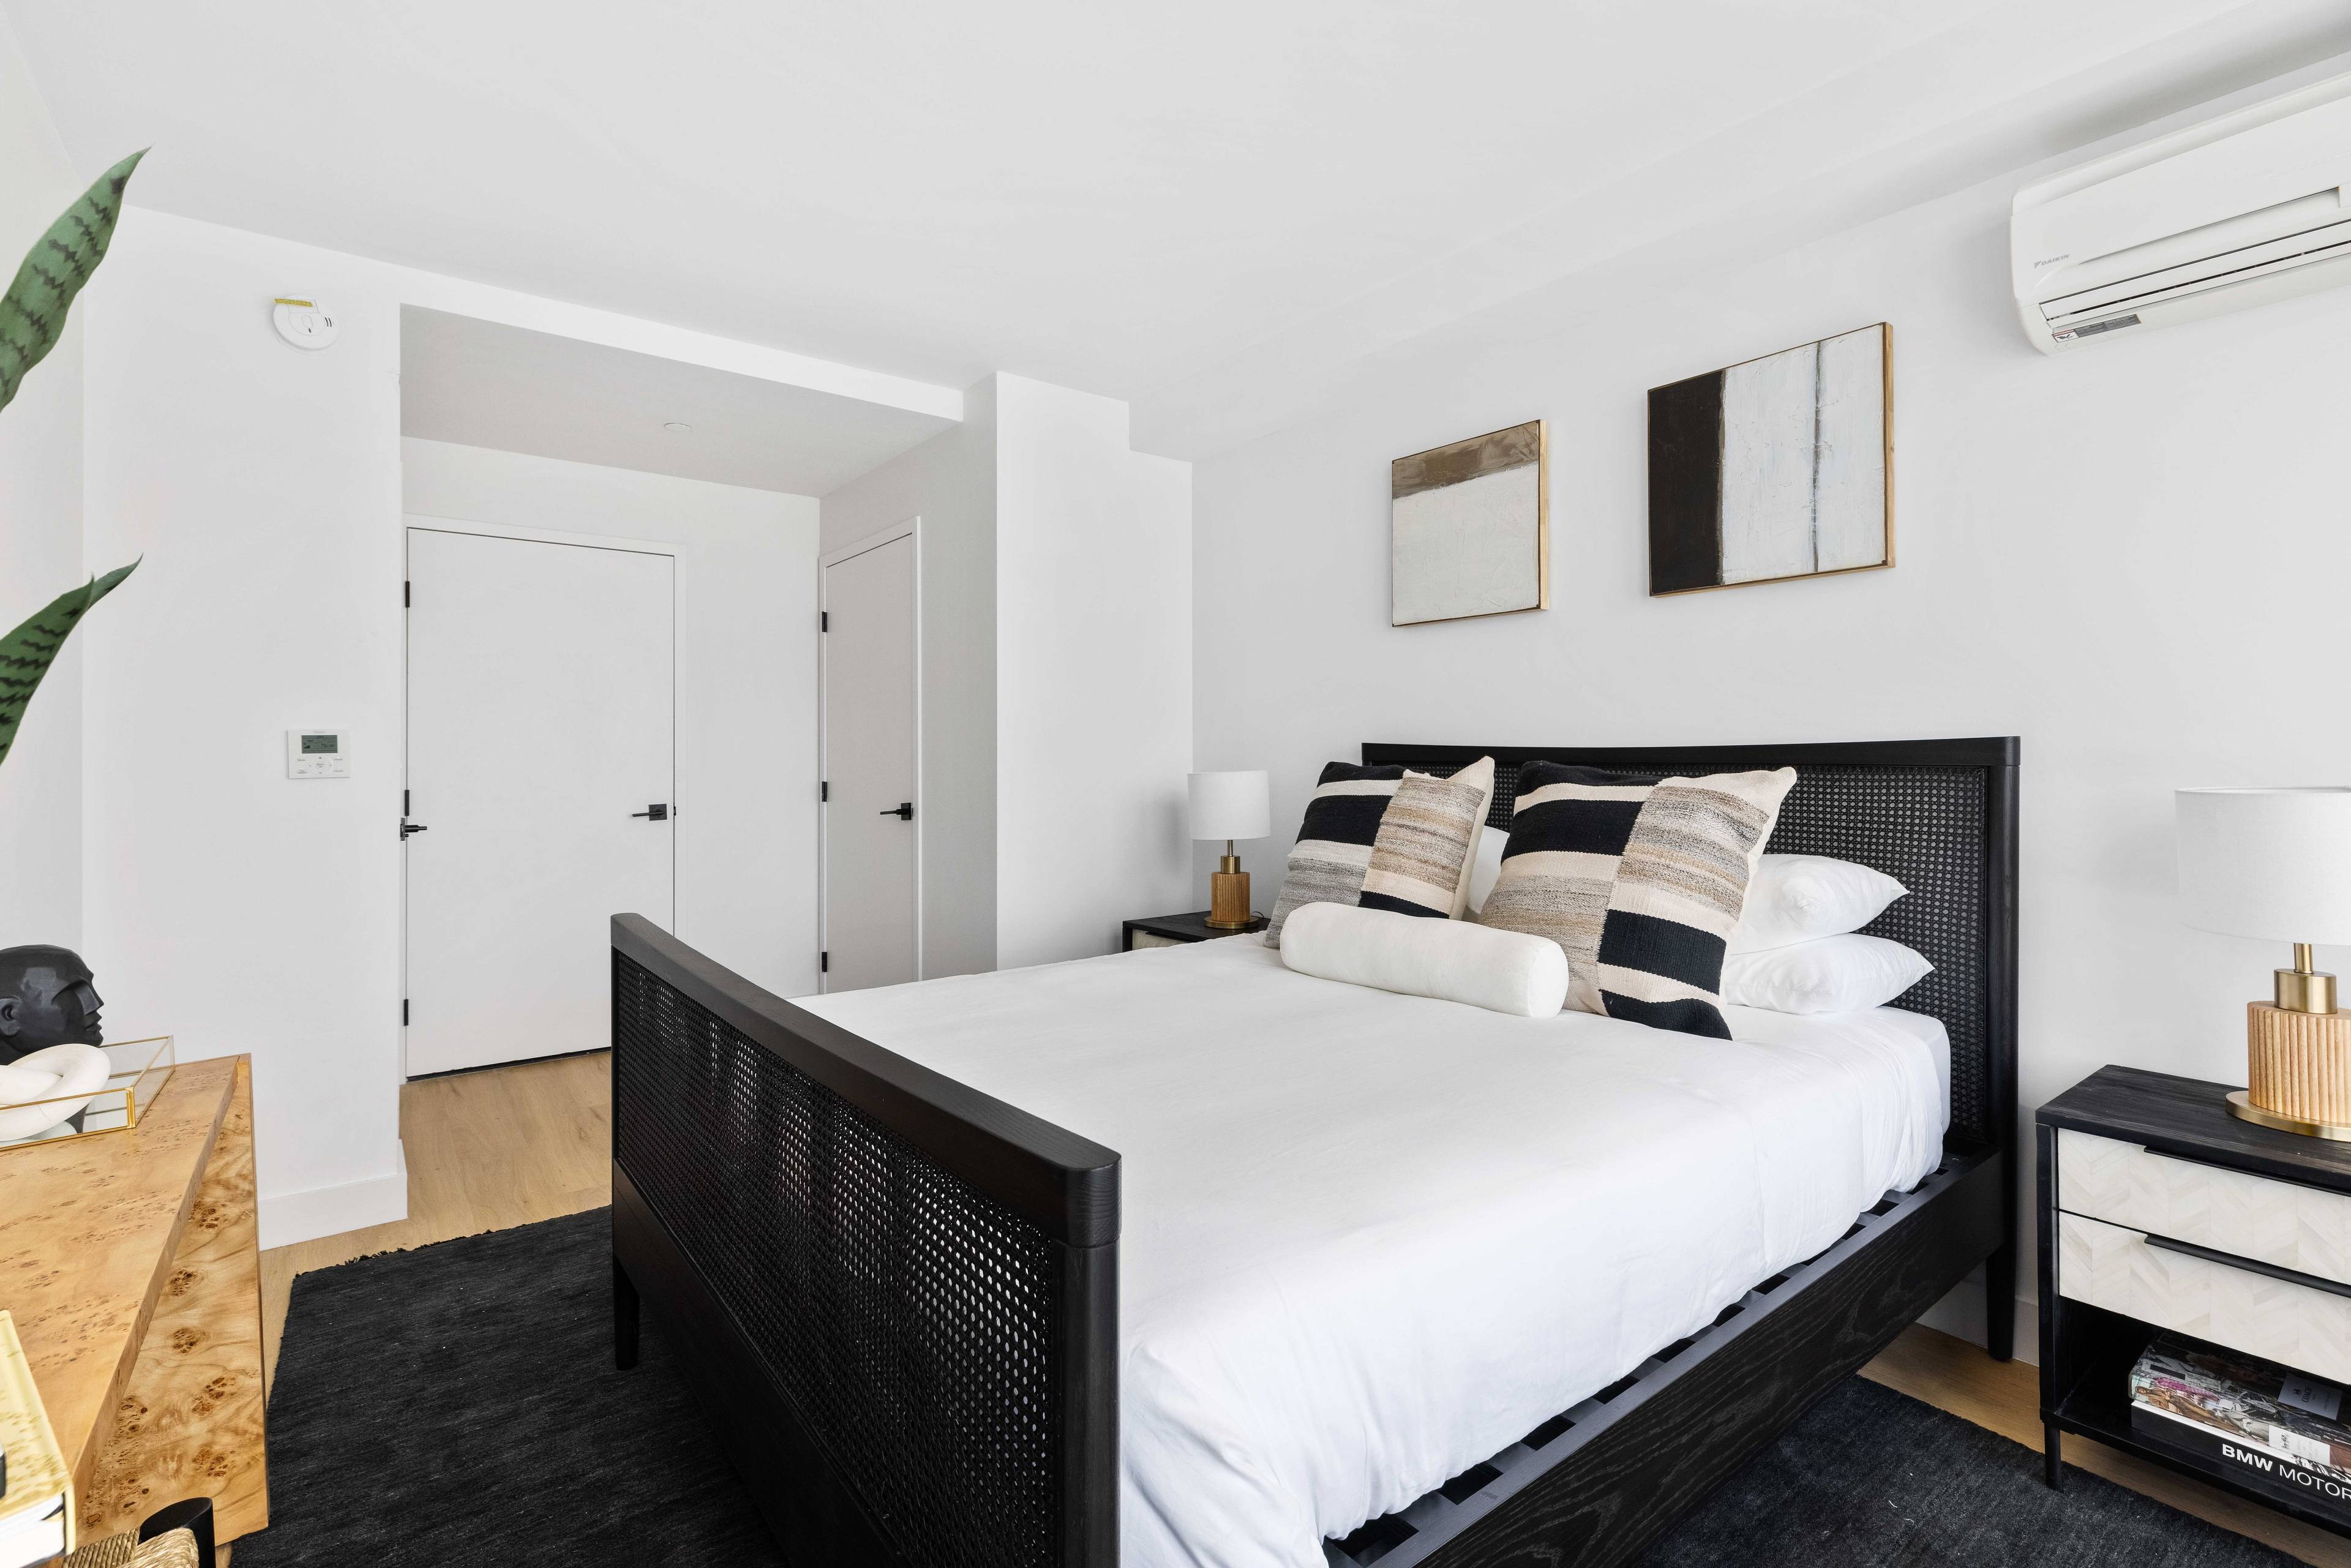 Beautiful one bedroom, one bathroom apartment with a private balcony ; featuring oversized windows, matte black and Calcutta finishes, custom tiled bathrooms, spacious closets, and in unit washer dryer.